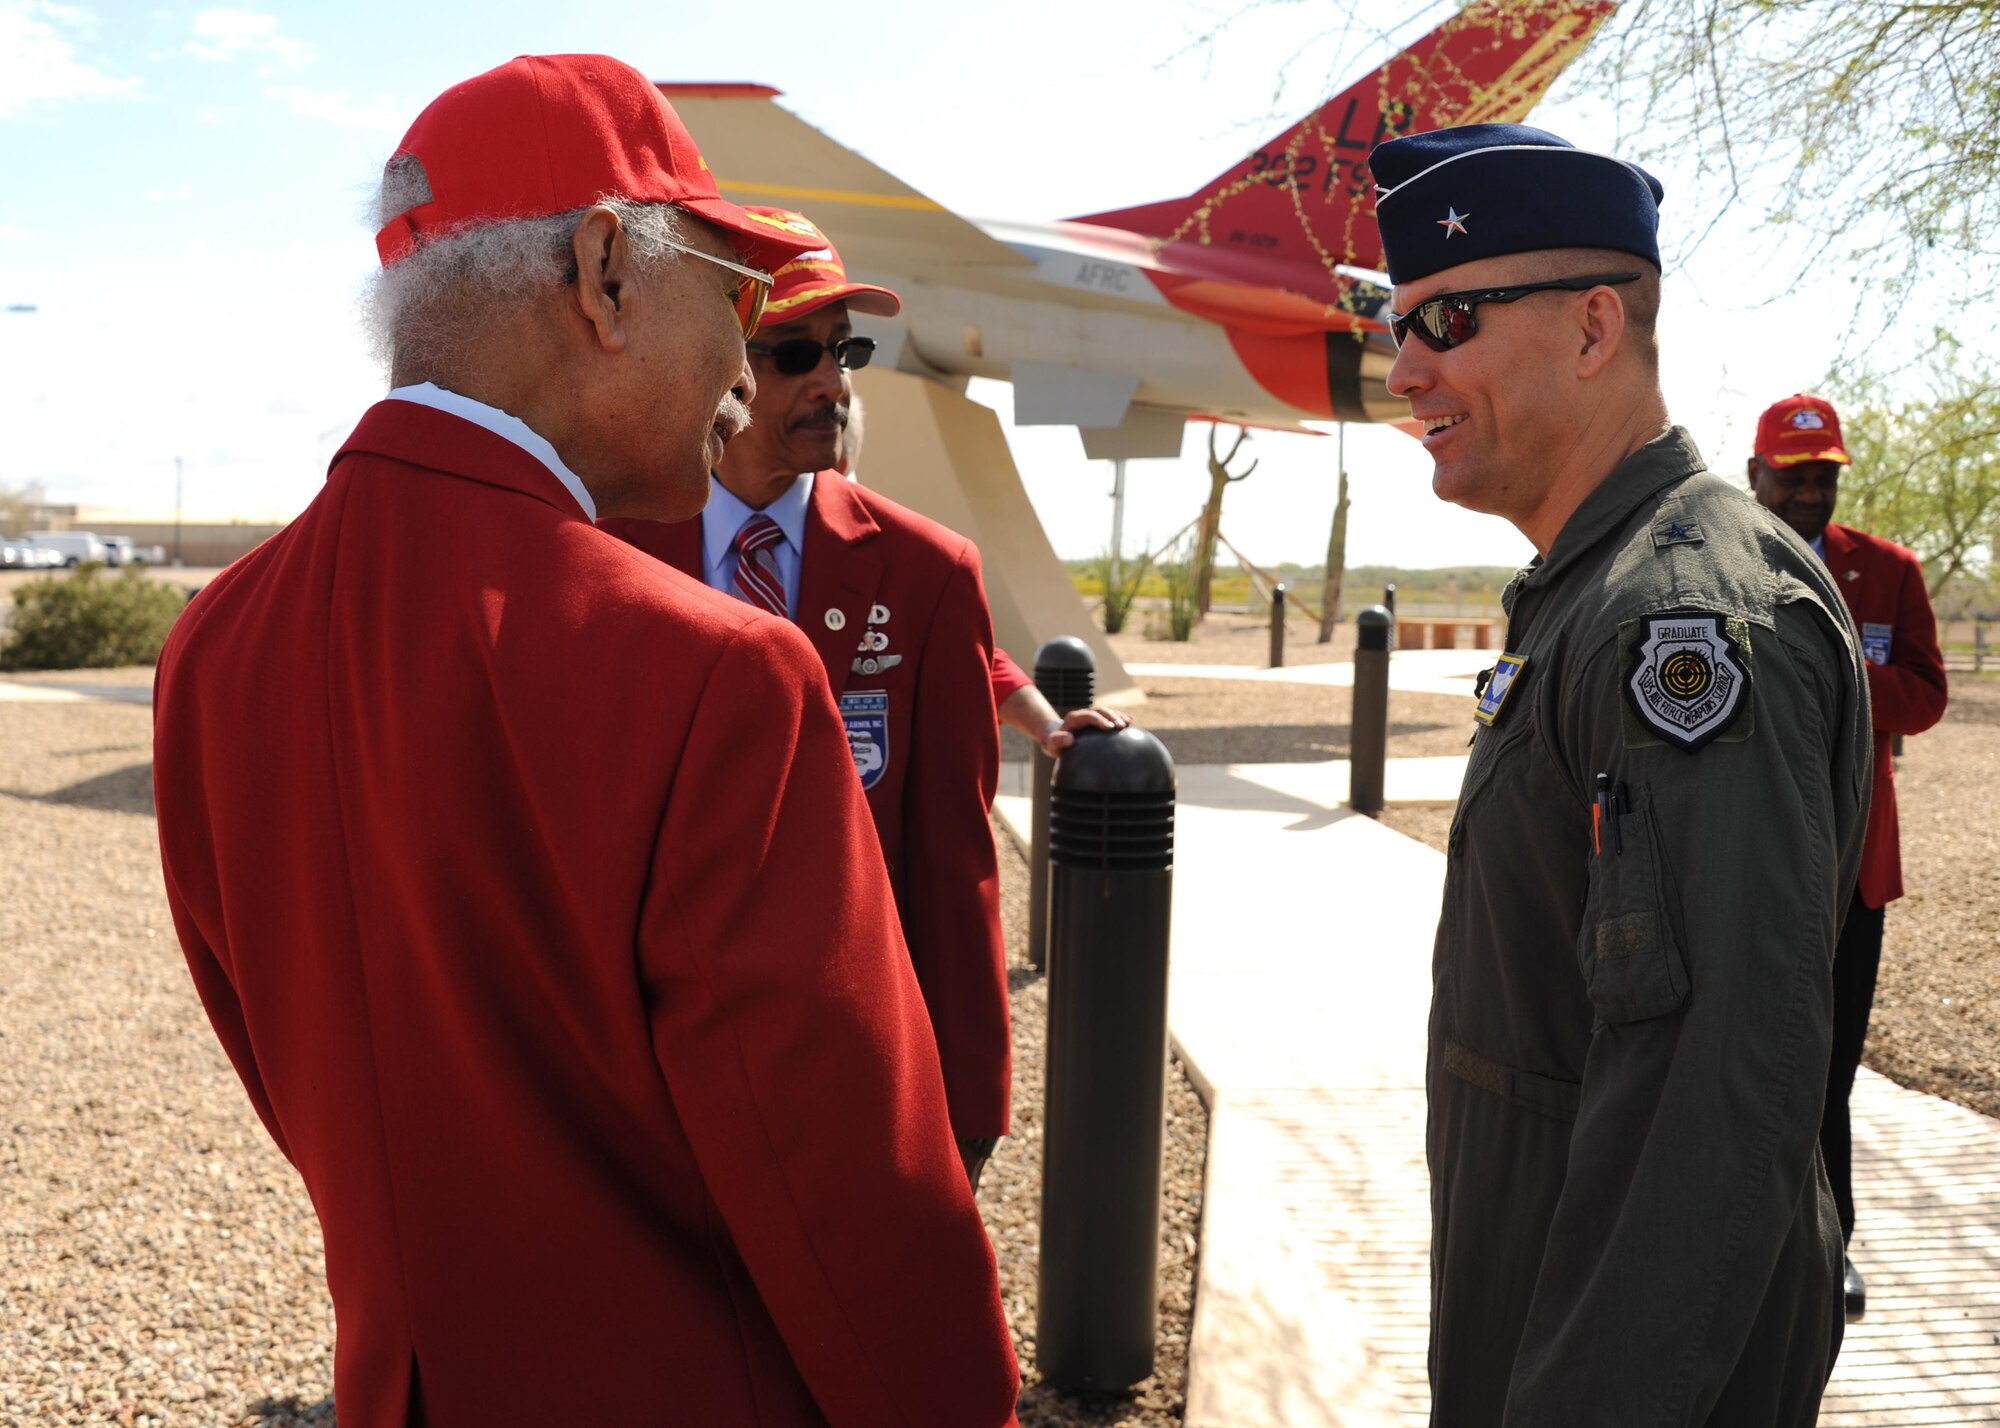 Brig. Gen. Brook Leonard, 56th Fighter Wing Commander, interacts with members of the Archer-Ragsdale Chapter of Tuskegee Airmen March 23, 2017, at Luke Air Force Base, Ariz. Luke’s relationship with the Tuskegee Airmen stems through the 302nd Fighter Squadron which was one of four African-American fighter squadrons to enter combat during World War II. The 302nd FS was attached to the 944th Fighter Wing Reserve Component which calls Luke home today. (U.S. Air Force photo by Airman 1st Class Caleb Worpel)